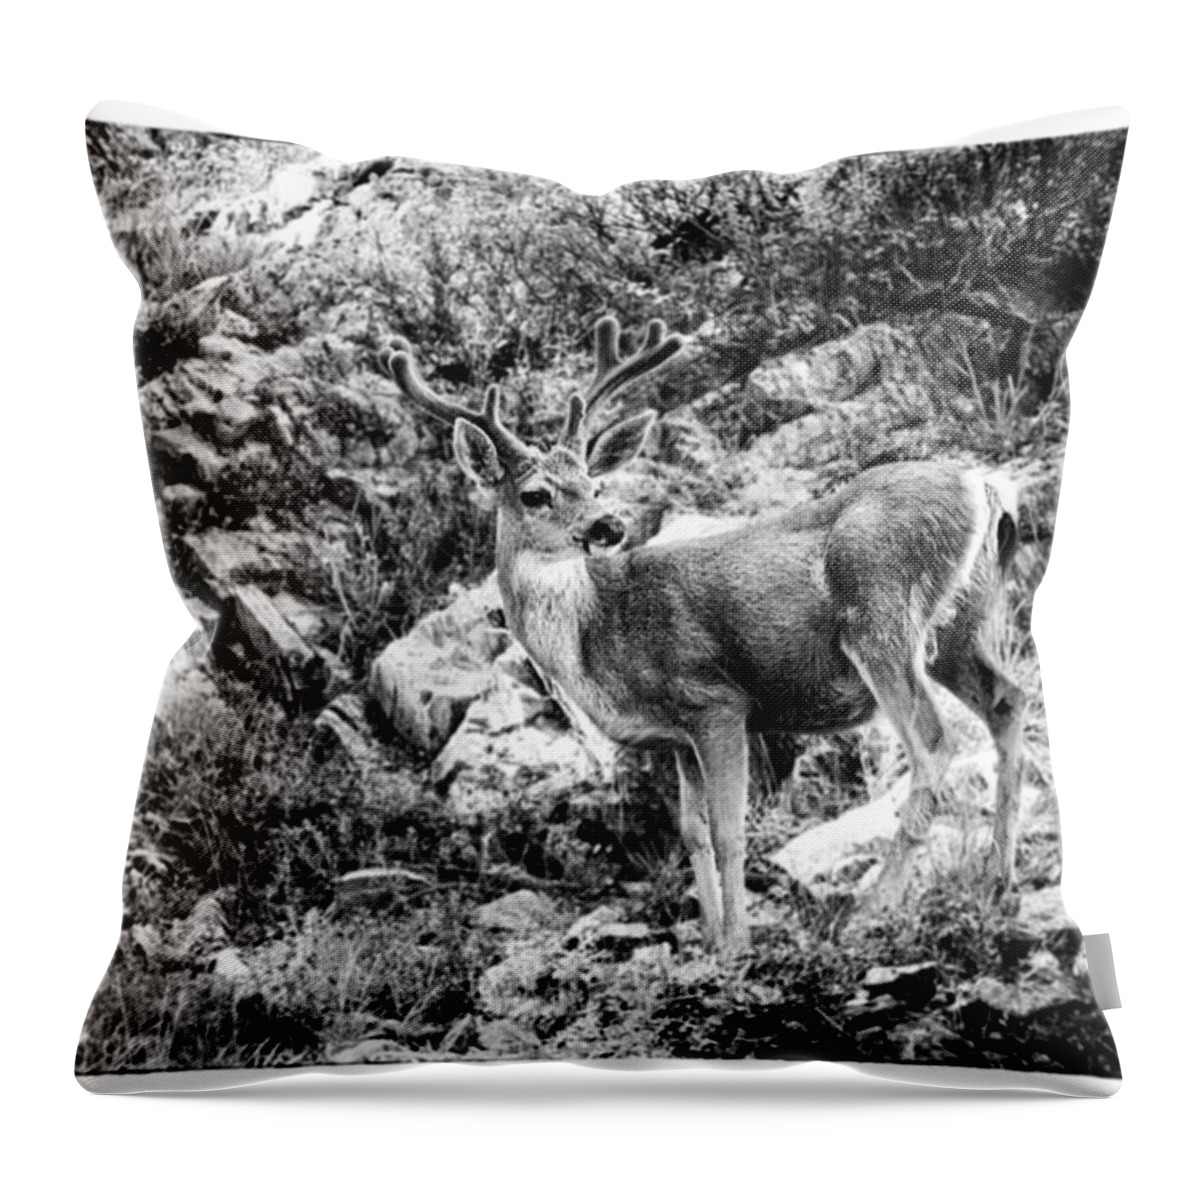 Deer Throw Pillow featuring the photograph Mule Deer Buck by Lawrence Knutsson